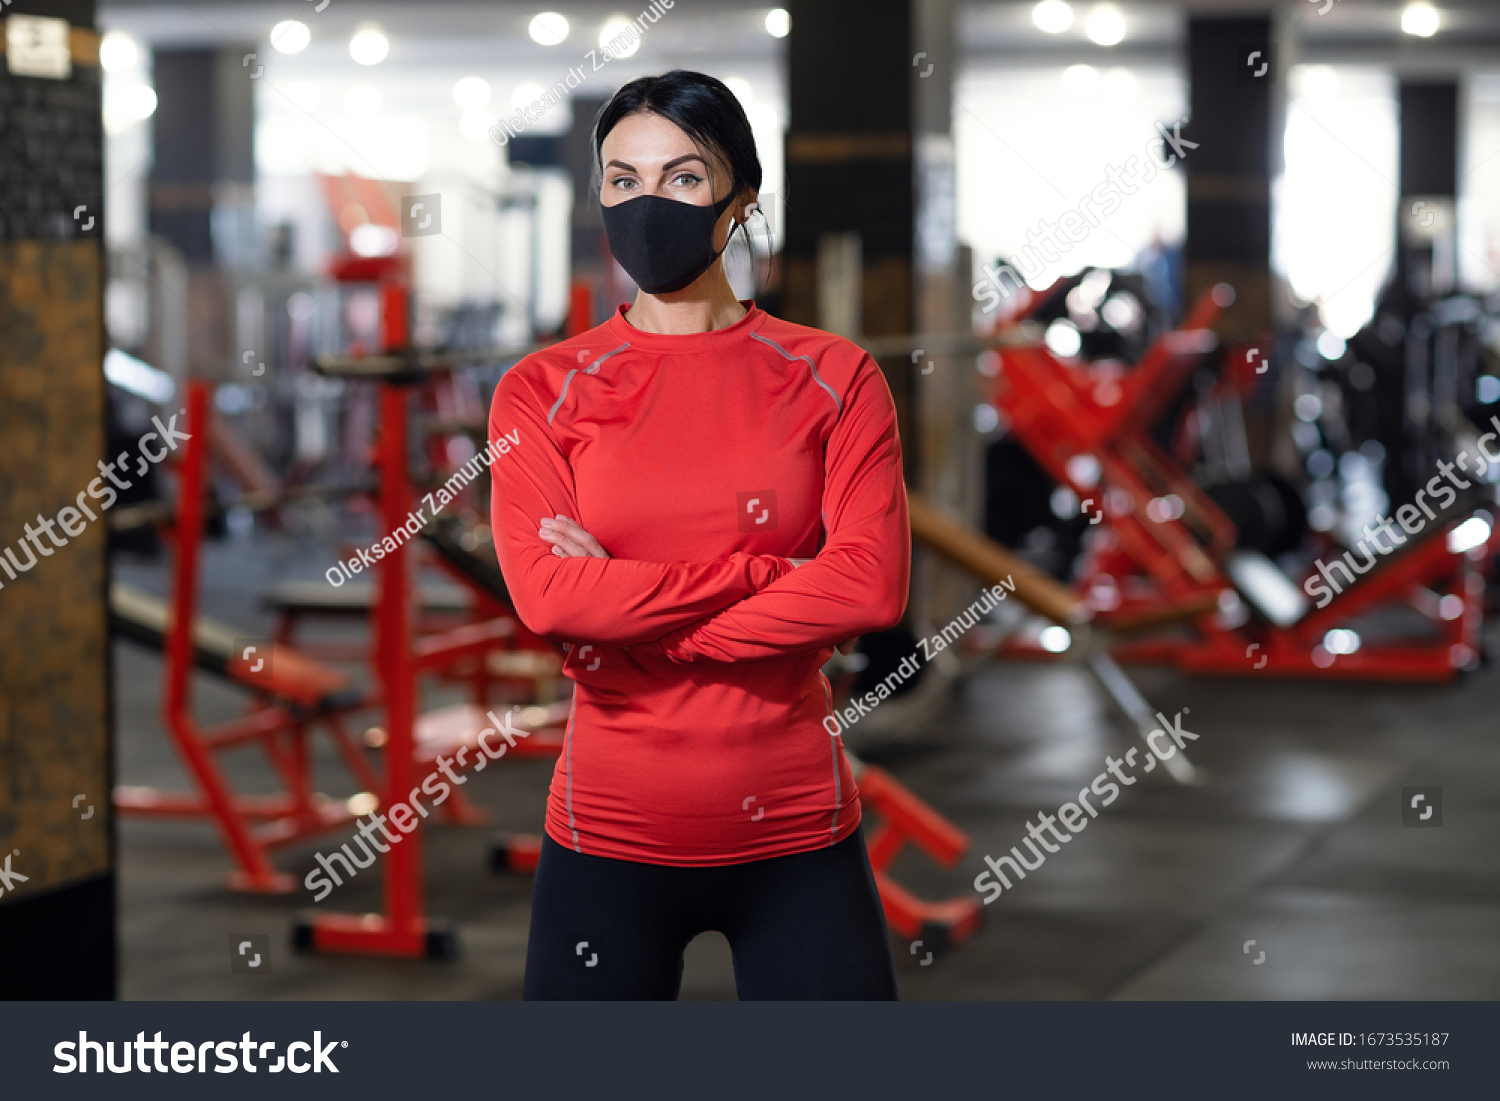 Coronavirus covid-19 prevention, fitness girl with a medical mask posing in gym. Fighting viruses. #1673535187